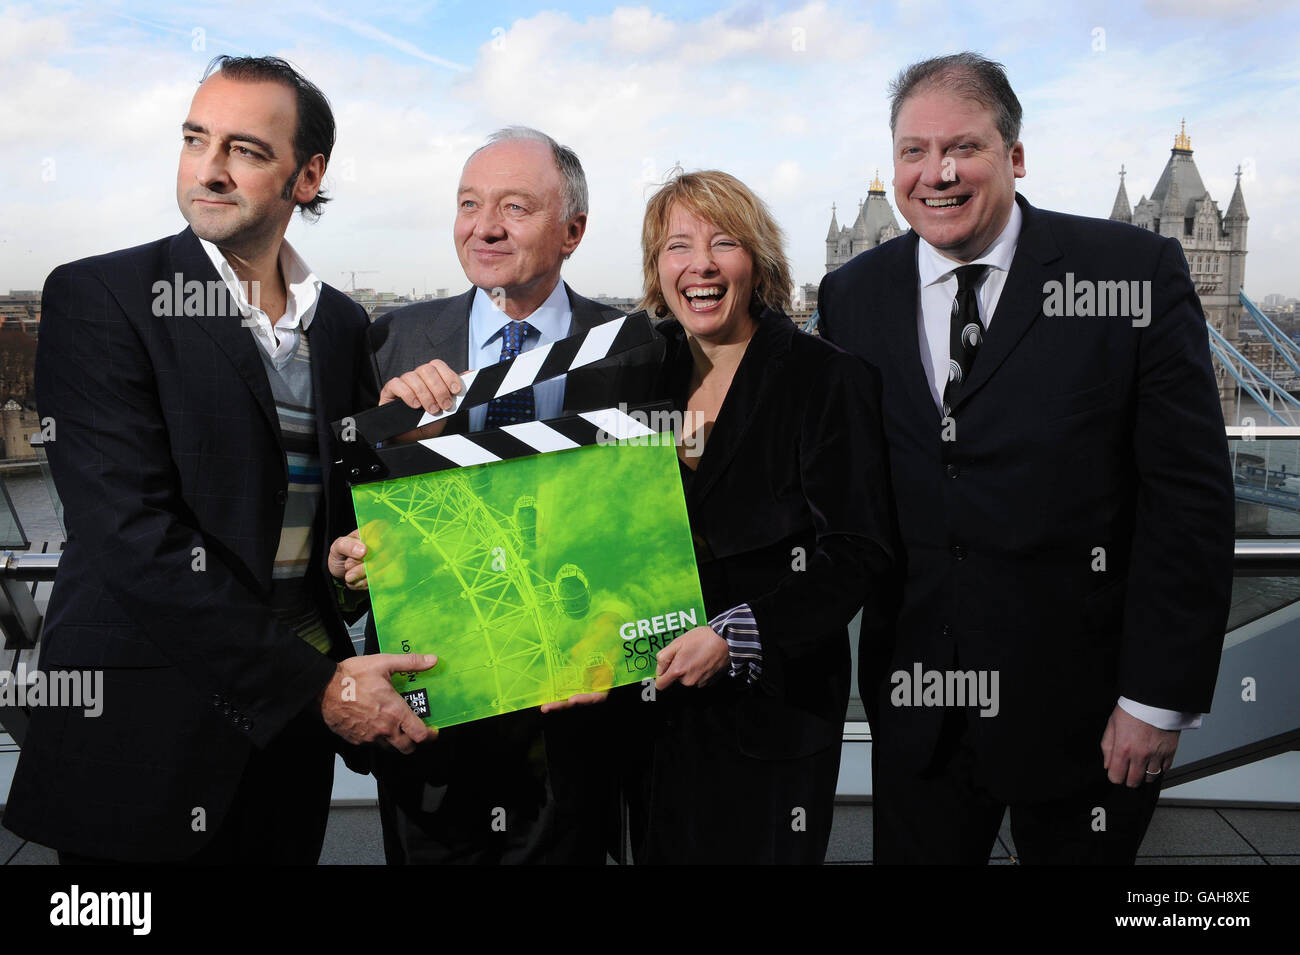 (From left to right) Alistair McGowan, Ken Livingstone, Emma Thompson and chief executive of Film London Adrian Wooton launch a programme to make London's film, TV and commercial production industries cleaner and greener at London City Hall. Stock Photo